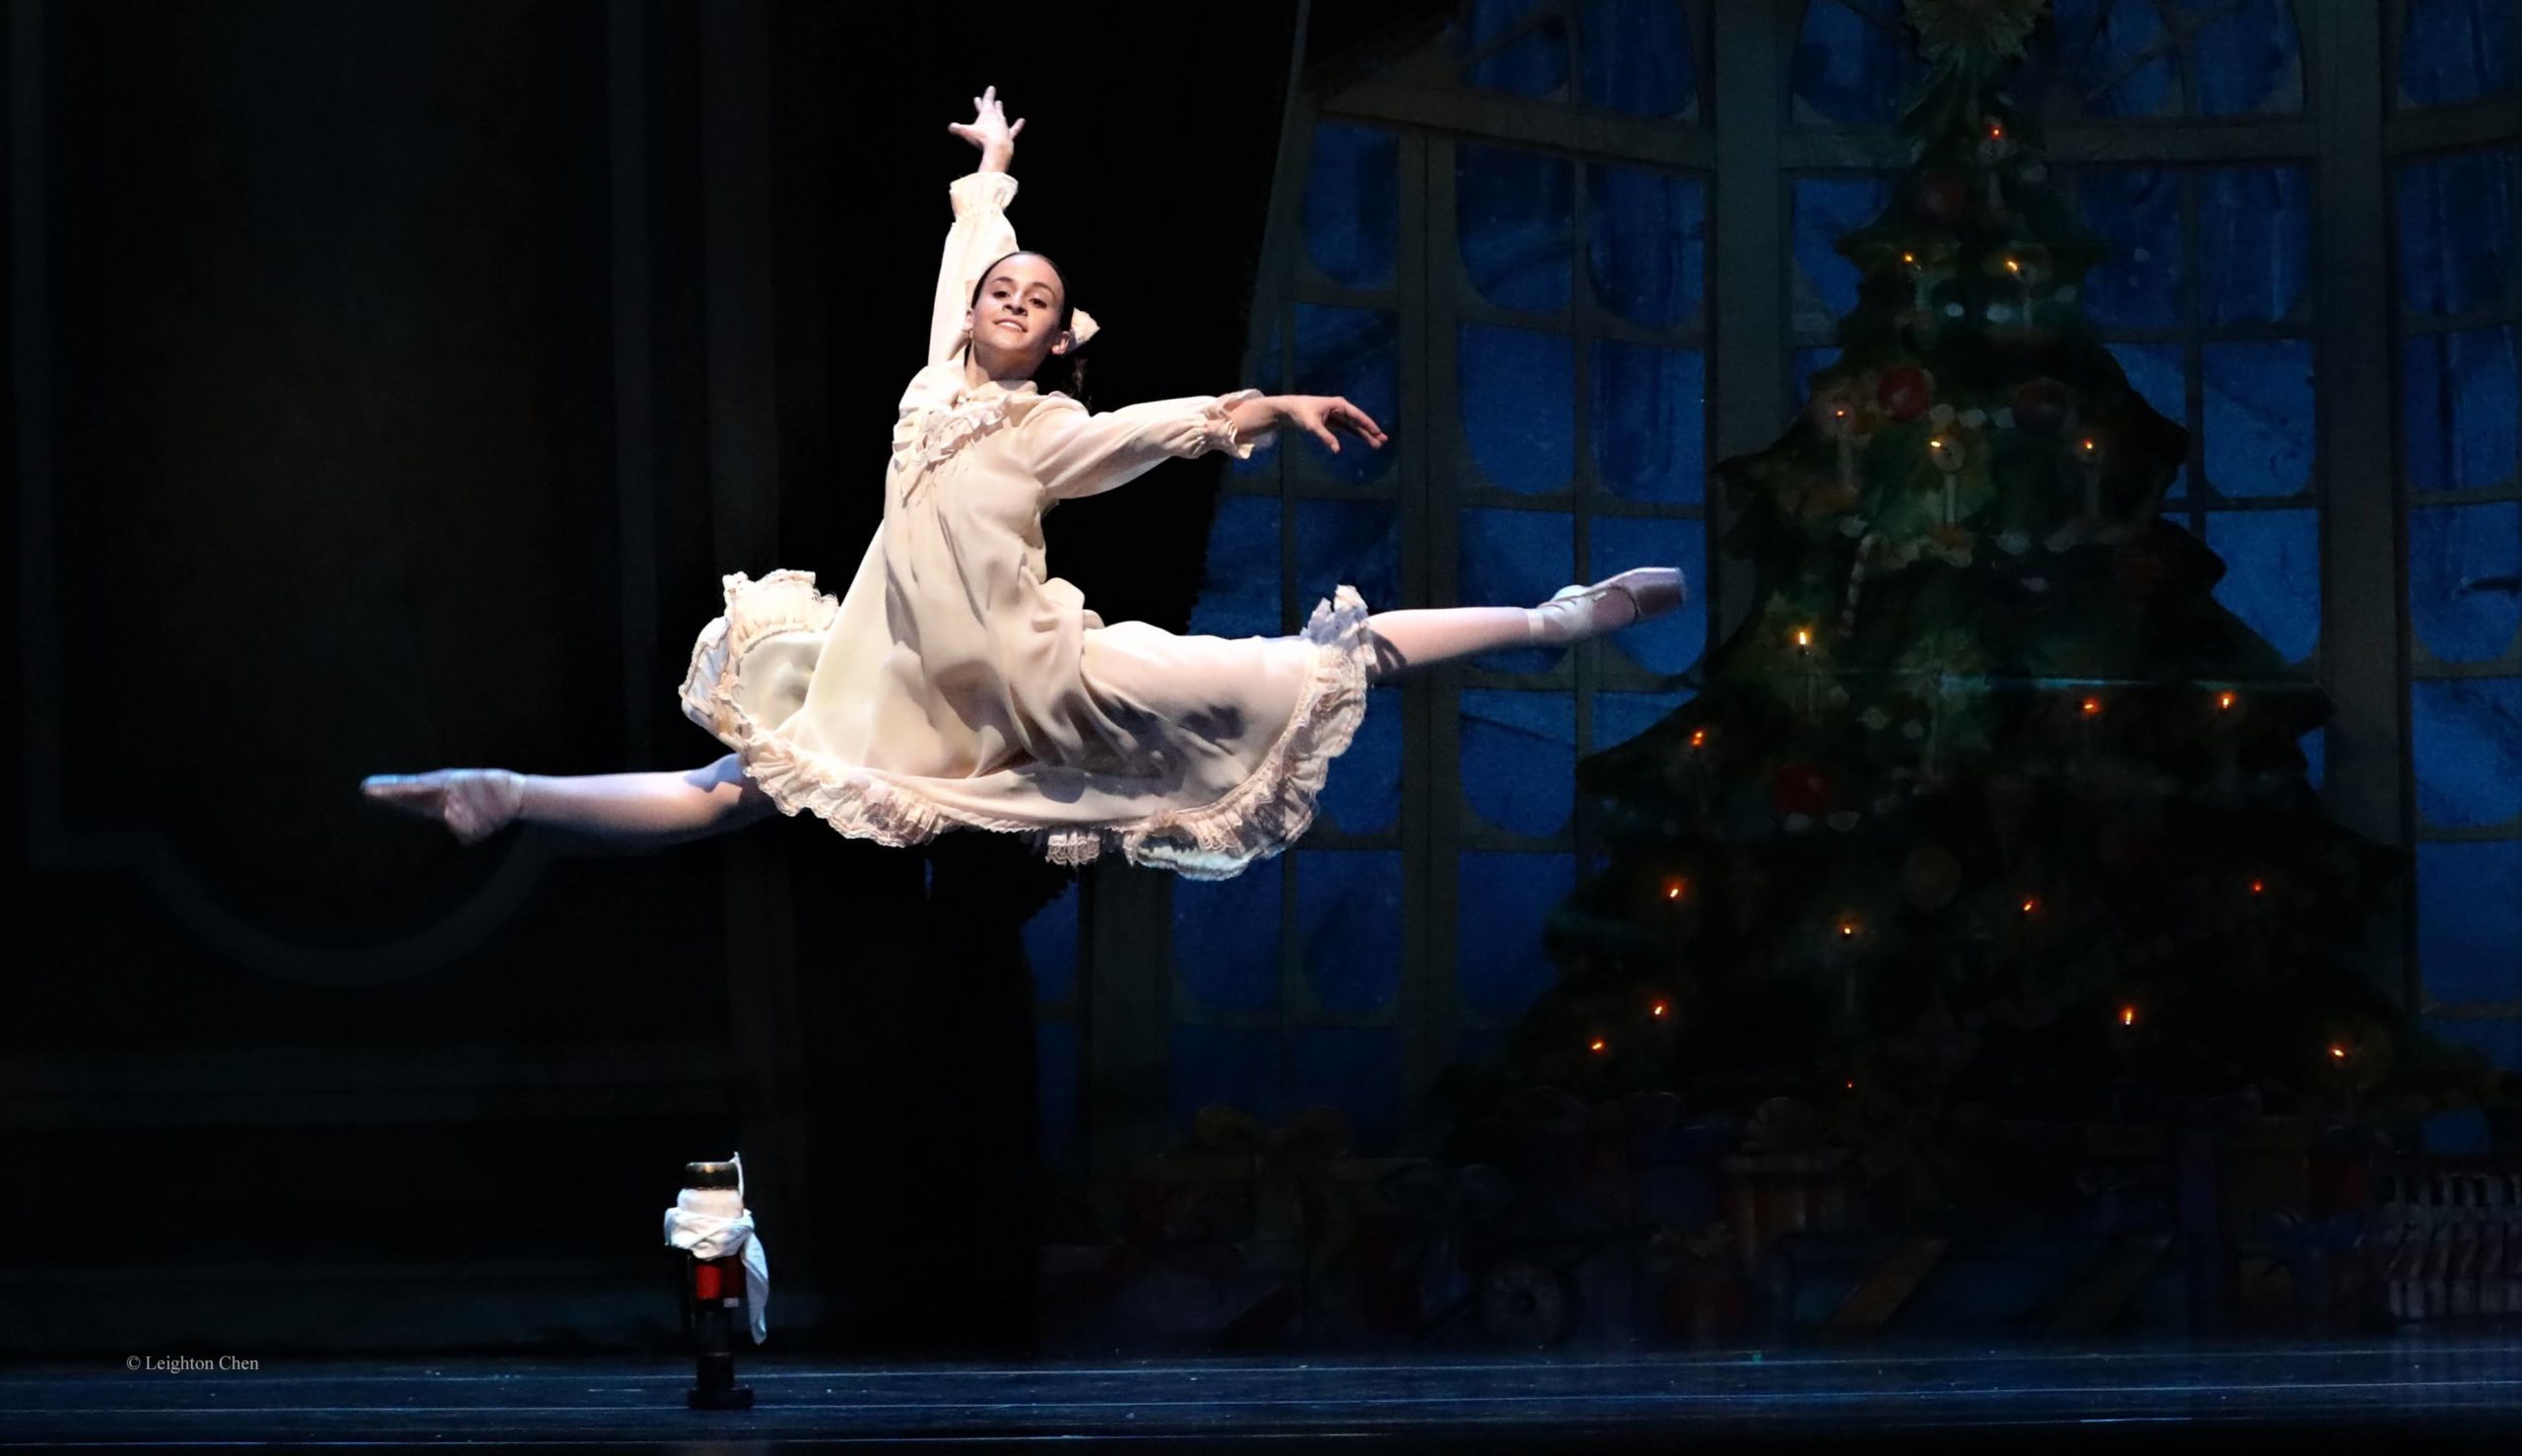 RING IN THE HOLIDAY SEASONWITH AMERICAN REPERTORY BALLET’STHE NUTCRACKER